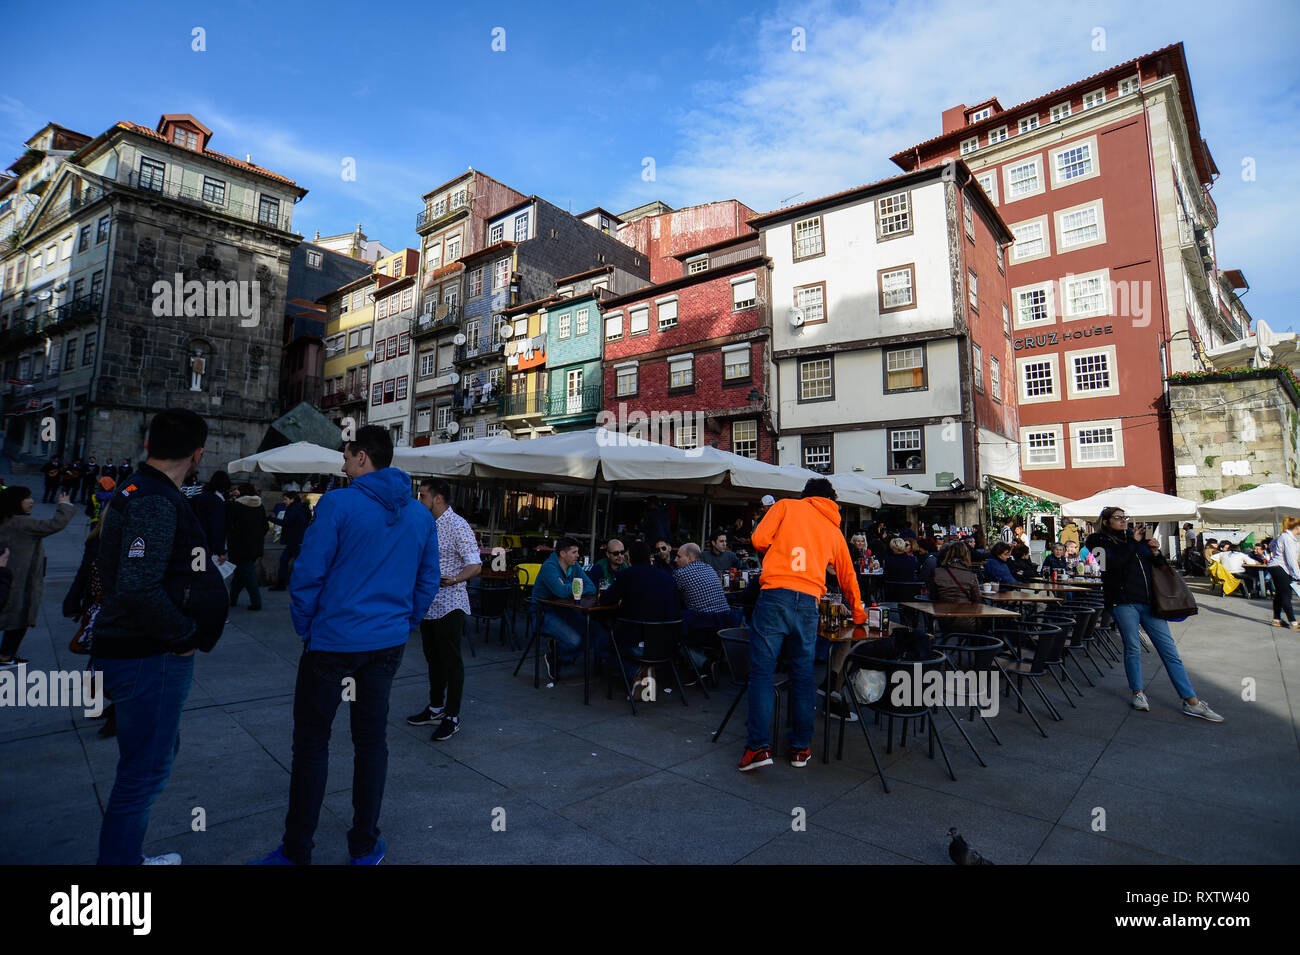 Tourists and locals seen seating at bars in the historical neighbourhood of Ribeira. In 2018, Porto entered the list of the 100 most visited cities in the world in a ranking prepared by Euromonitor International. In 2018 it is estimated that the number of tourists reached 2.39 million. Stock Photo